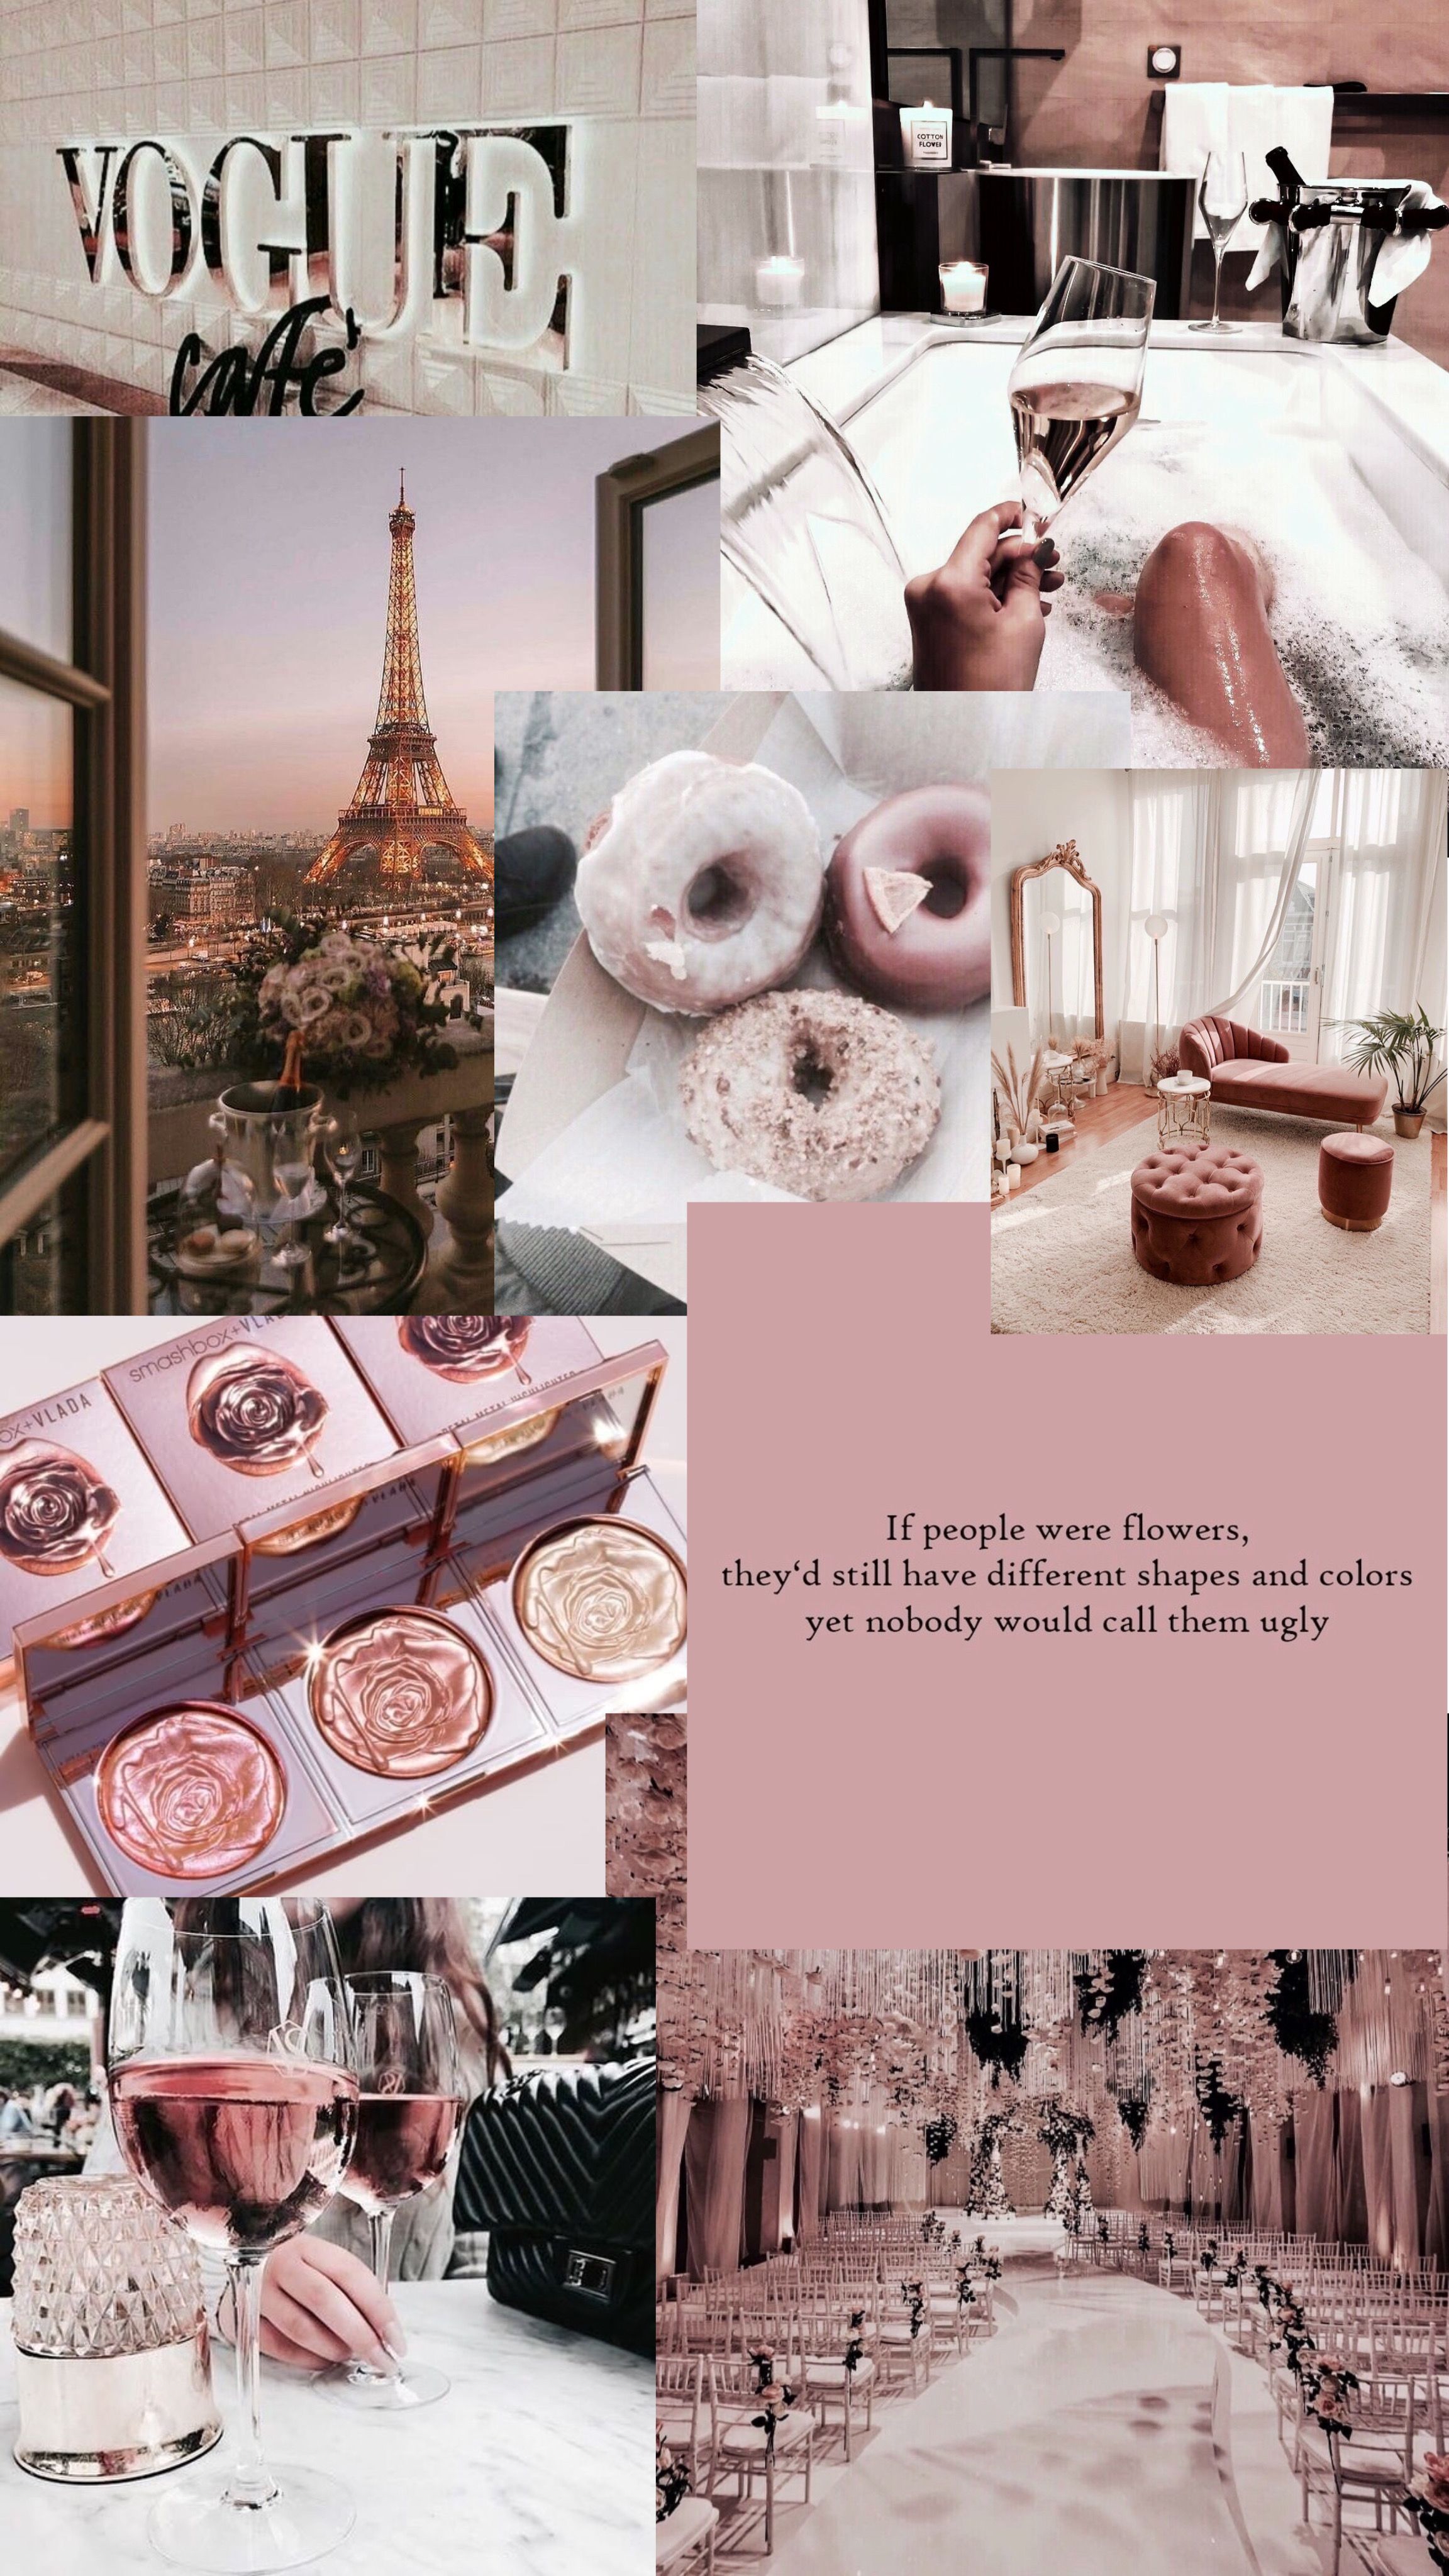 Aesthetic collage of pink and rose gold images including donuts, the Eiffel Tower, and Vogue magazine. - Rose gold